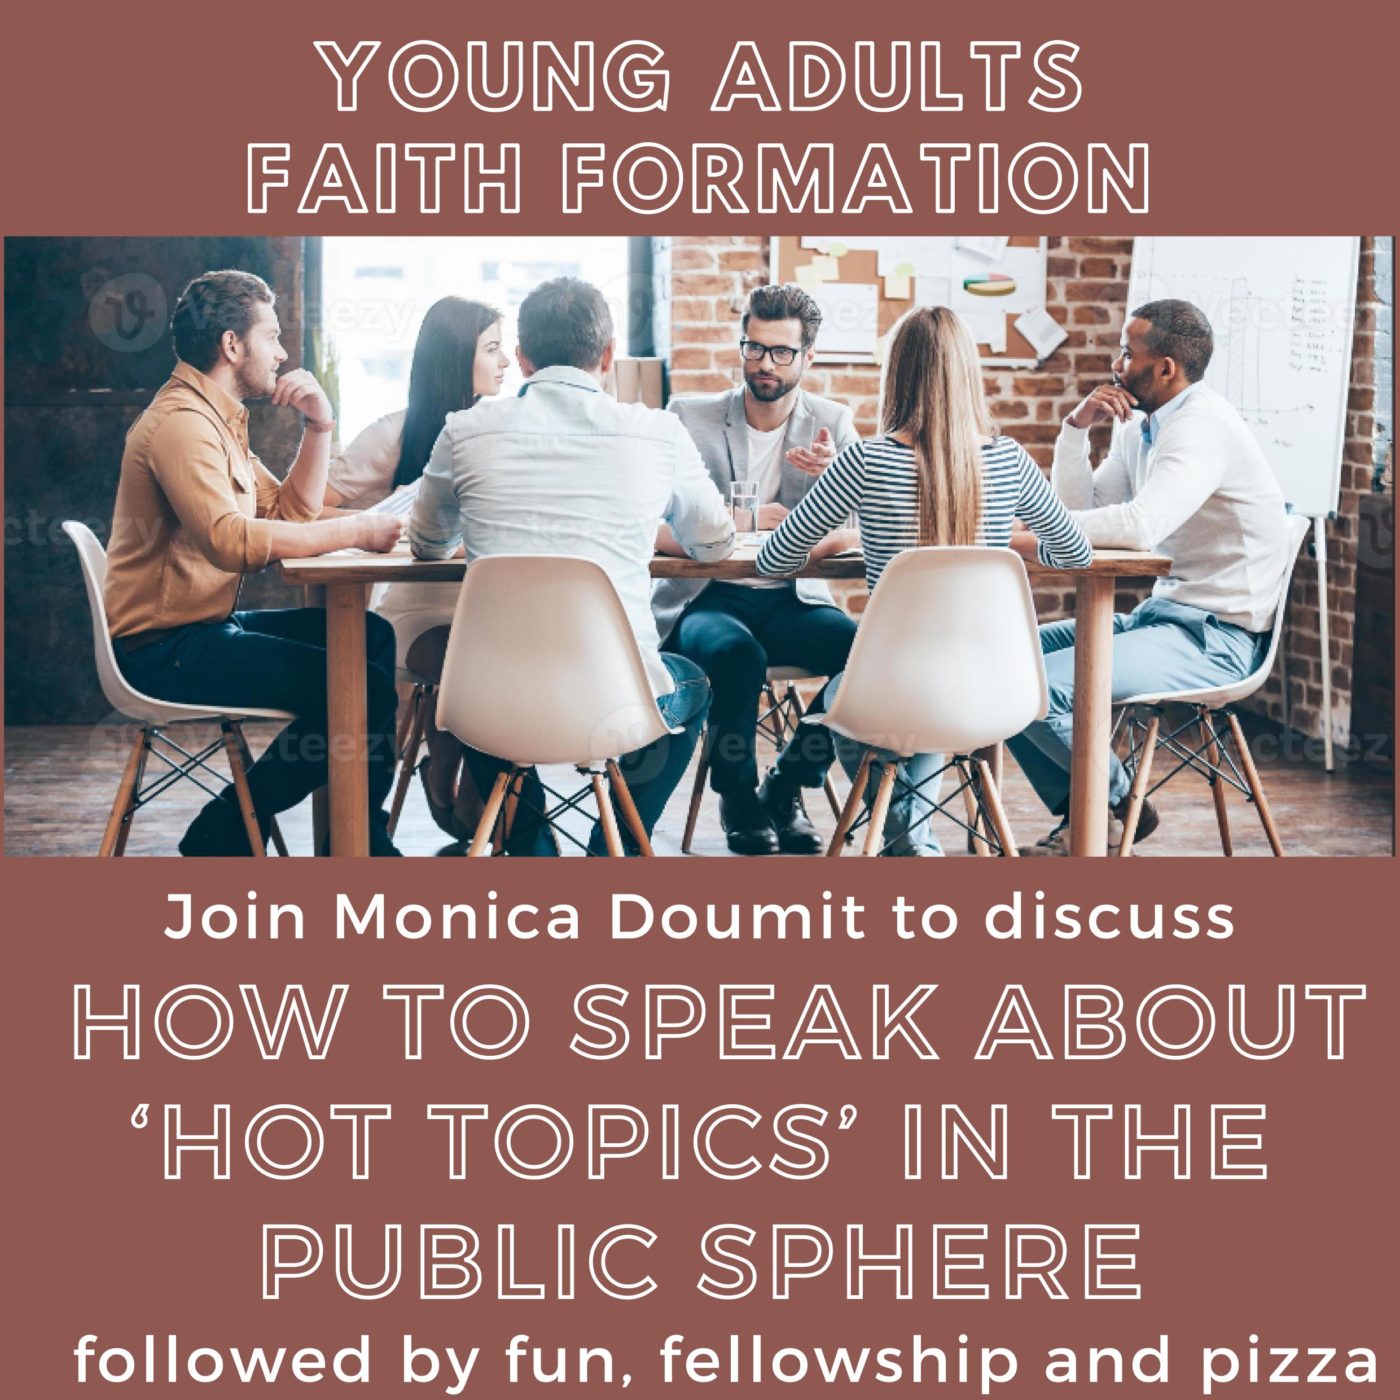 Mt Druitt South Young Adult Faith Formation (3 March)